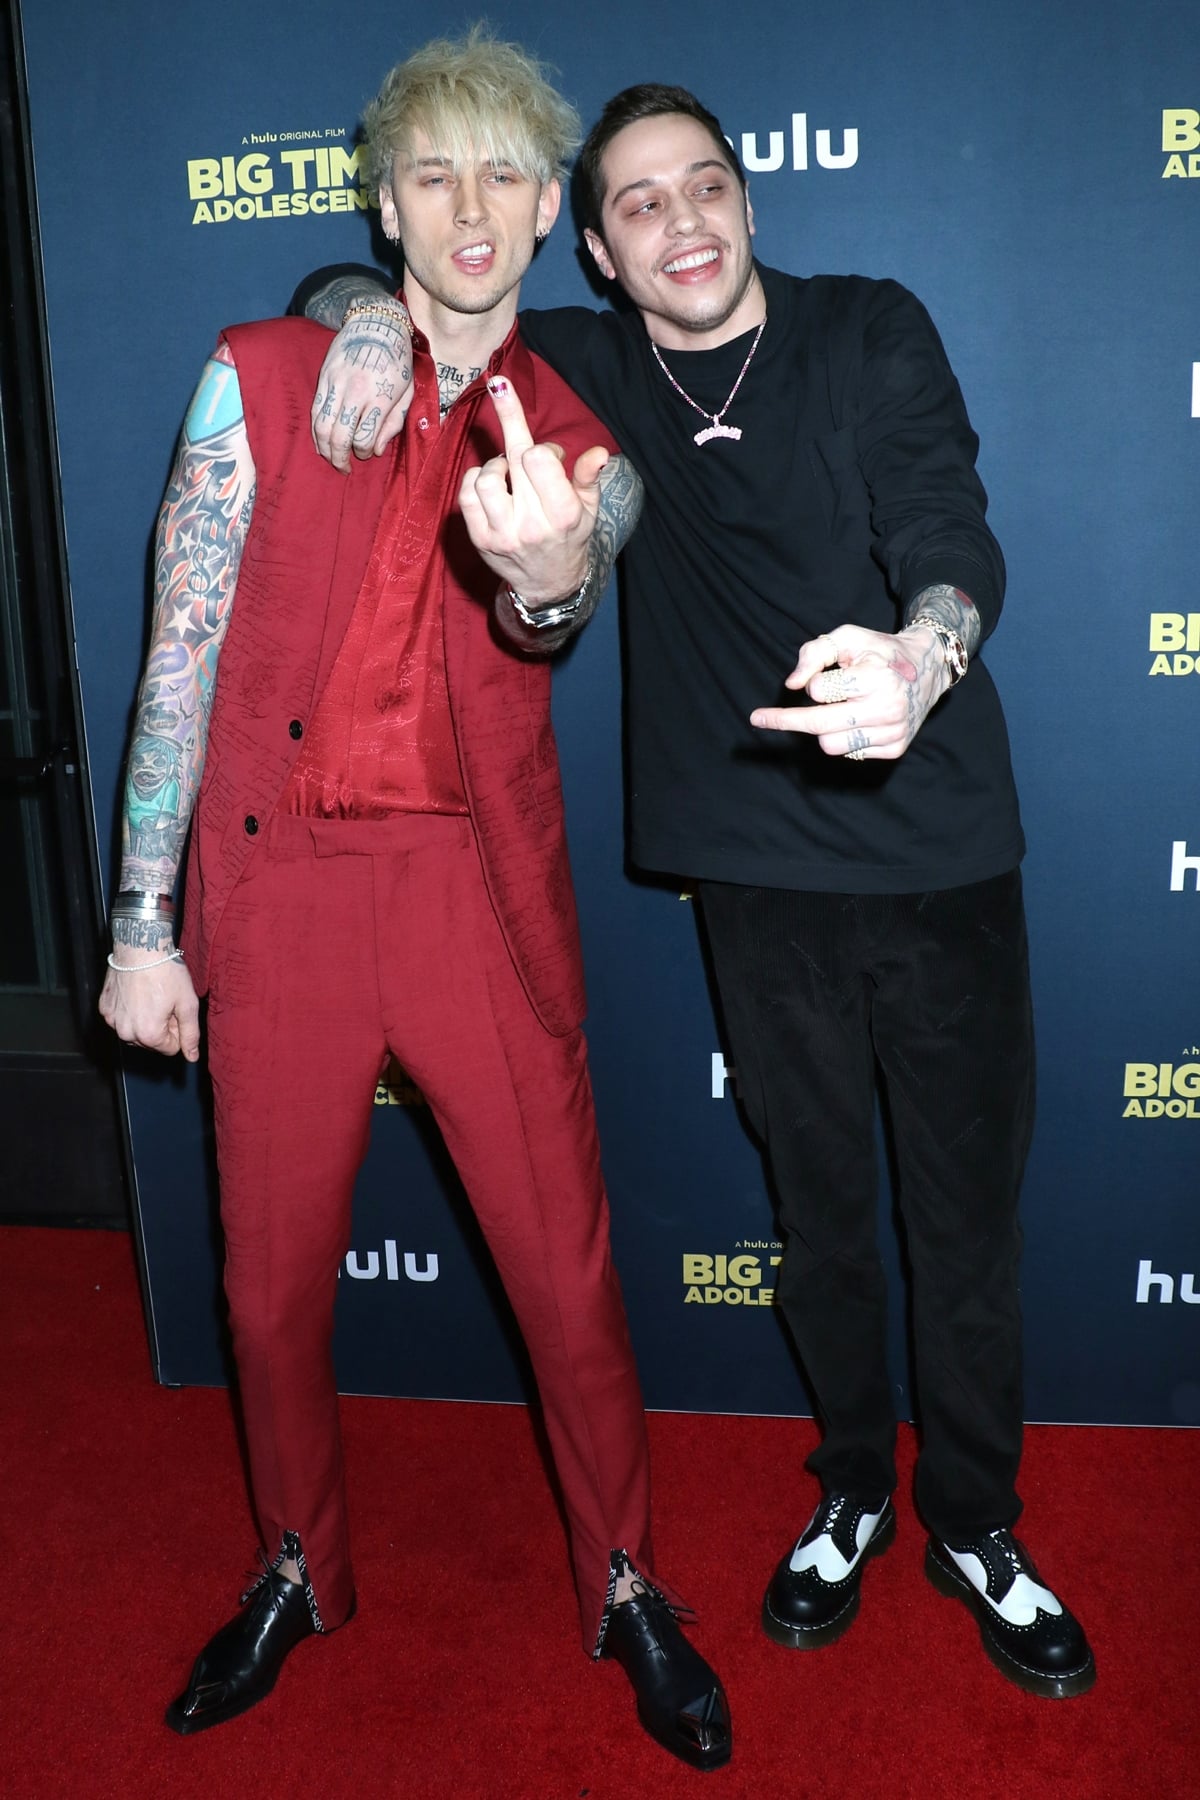 Machine Gun Kelly (AKA Colson Baker) and Pete Davidson bonded over their love of weed